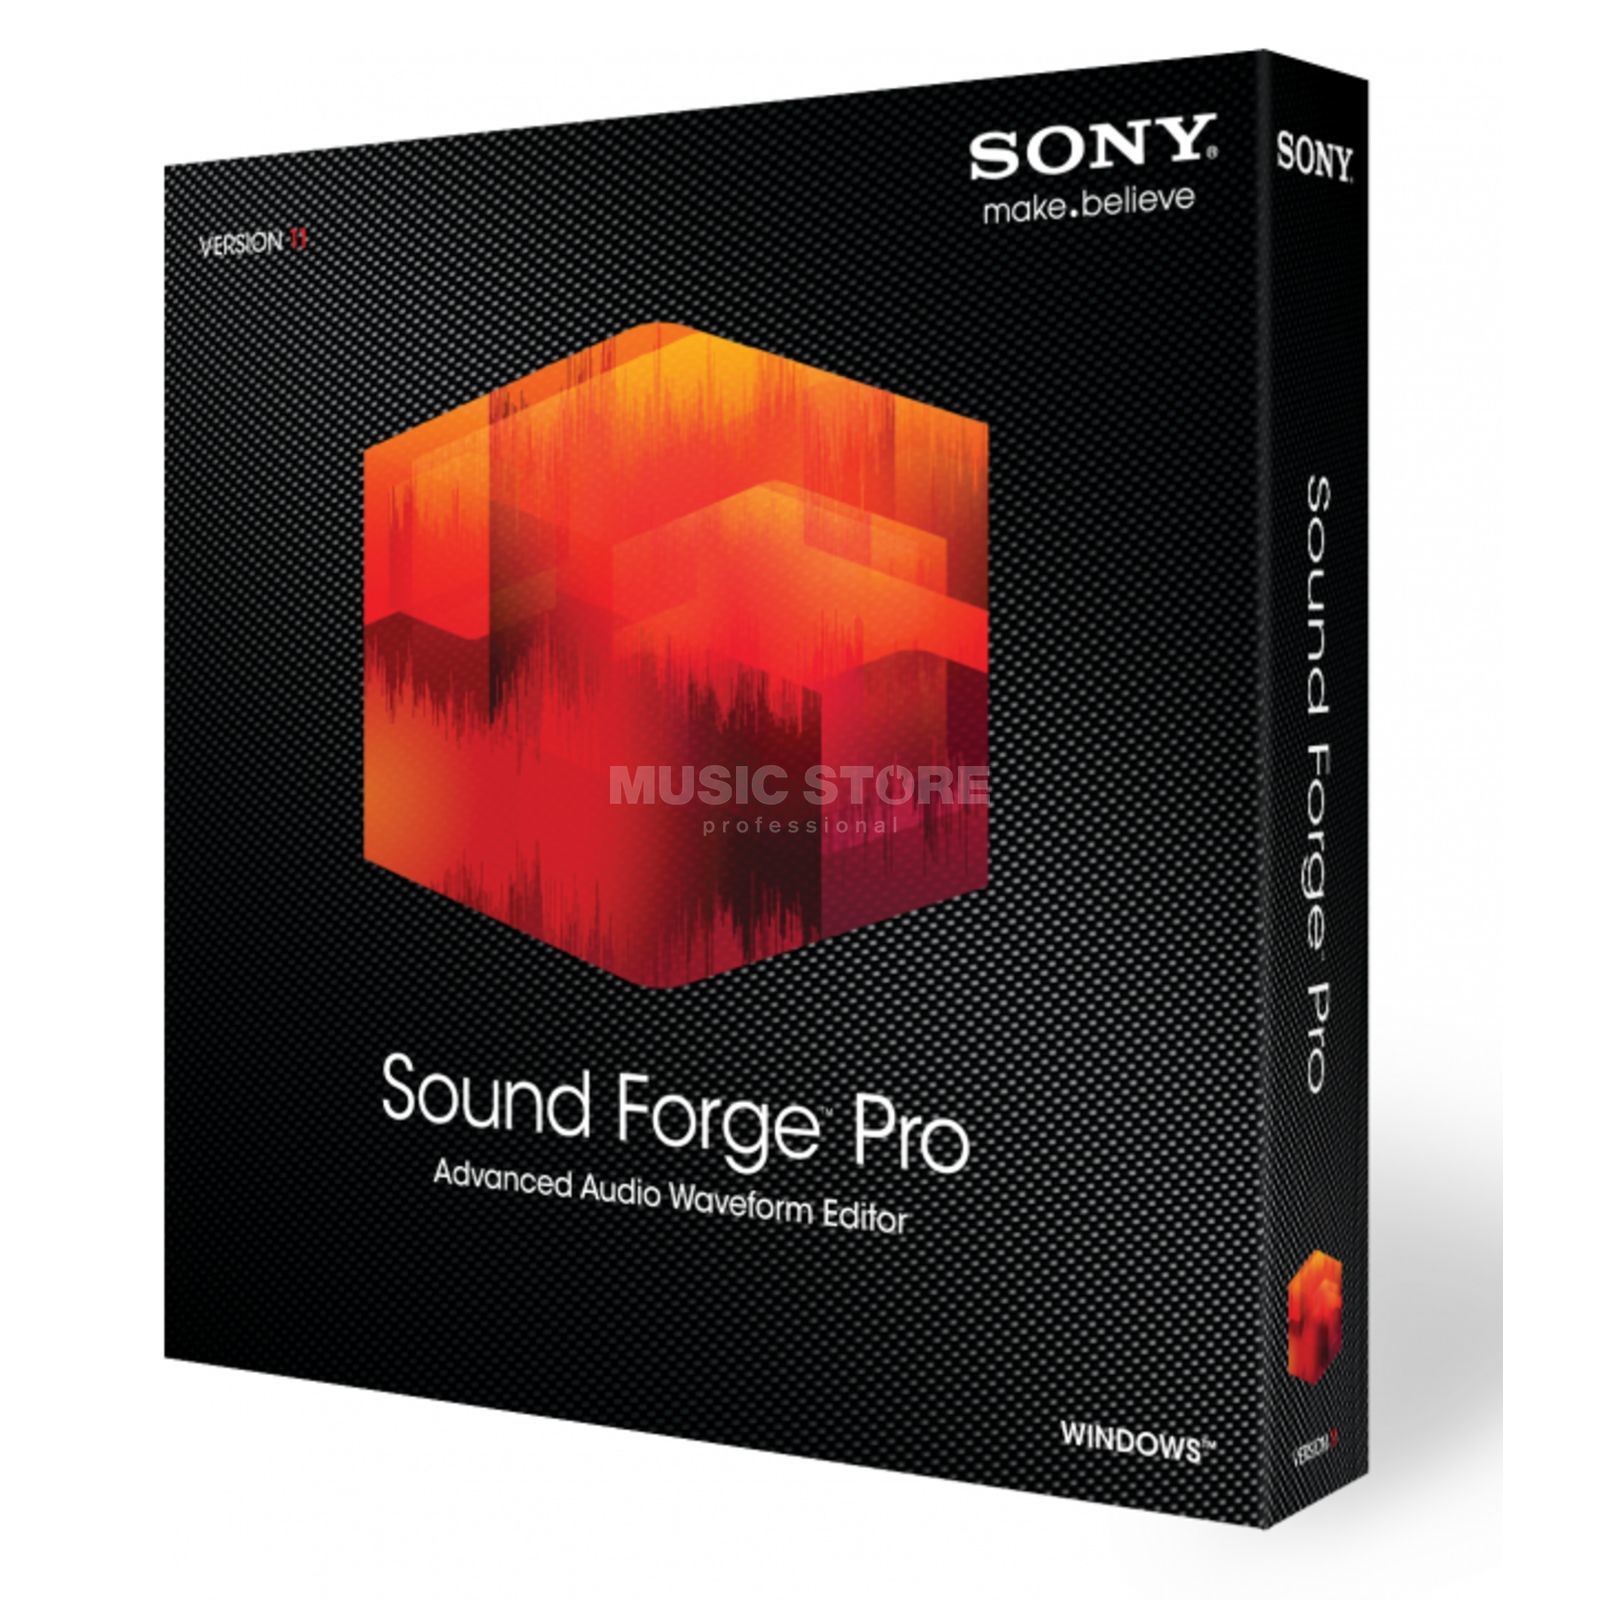 sonic sound forge free download full version